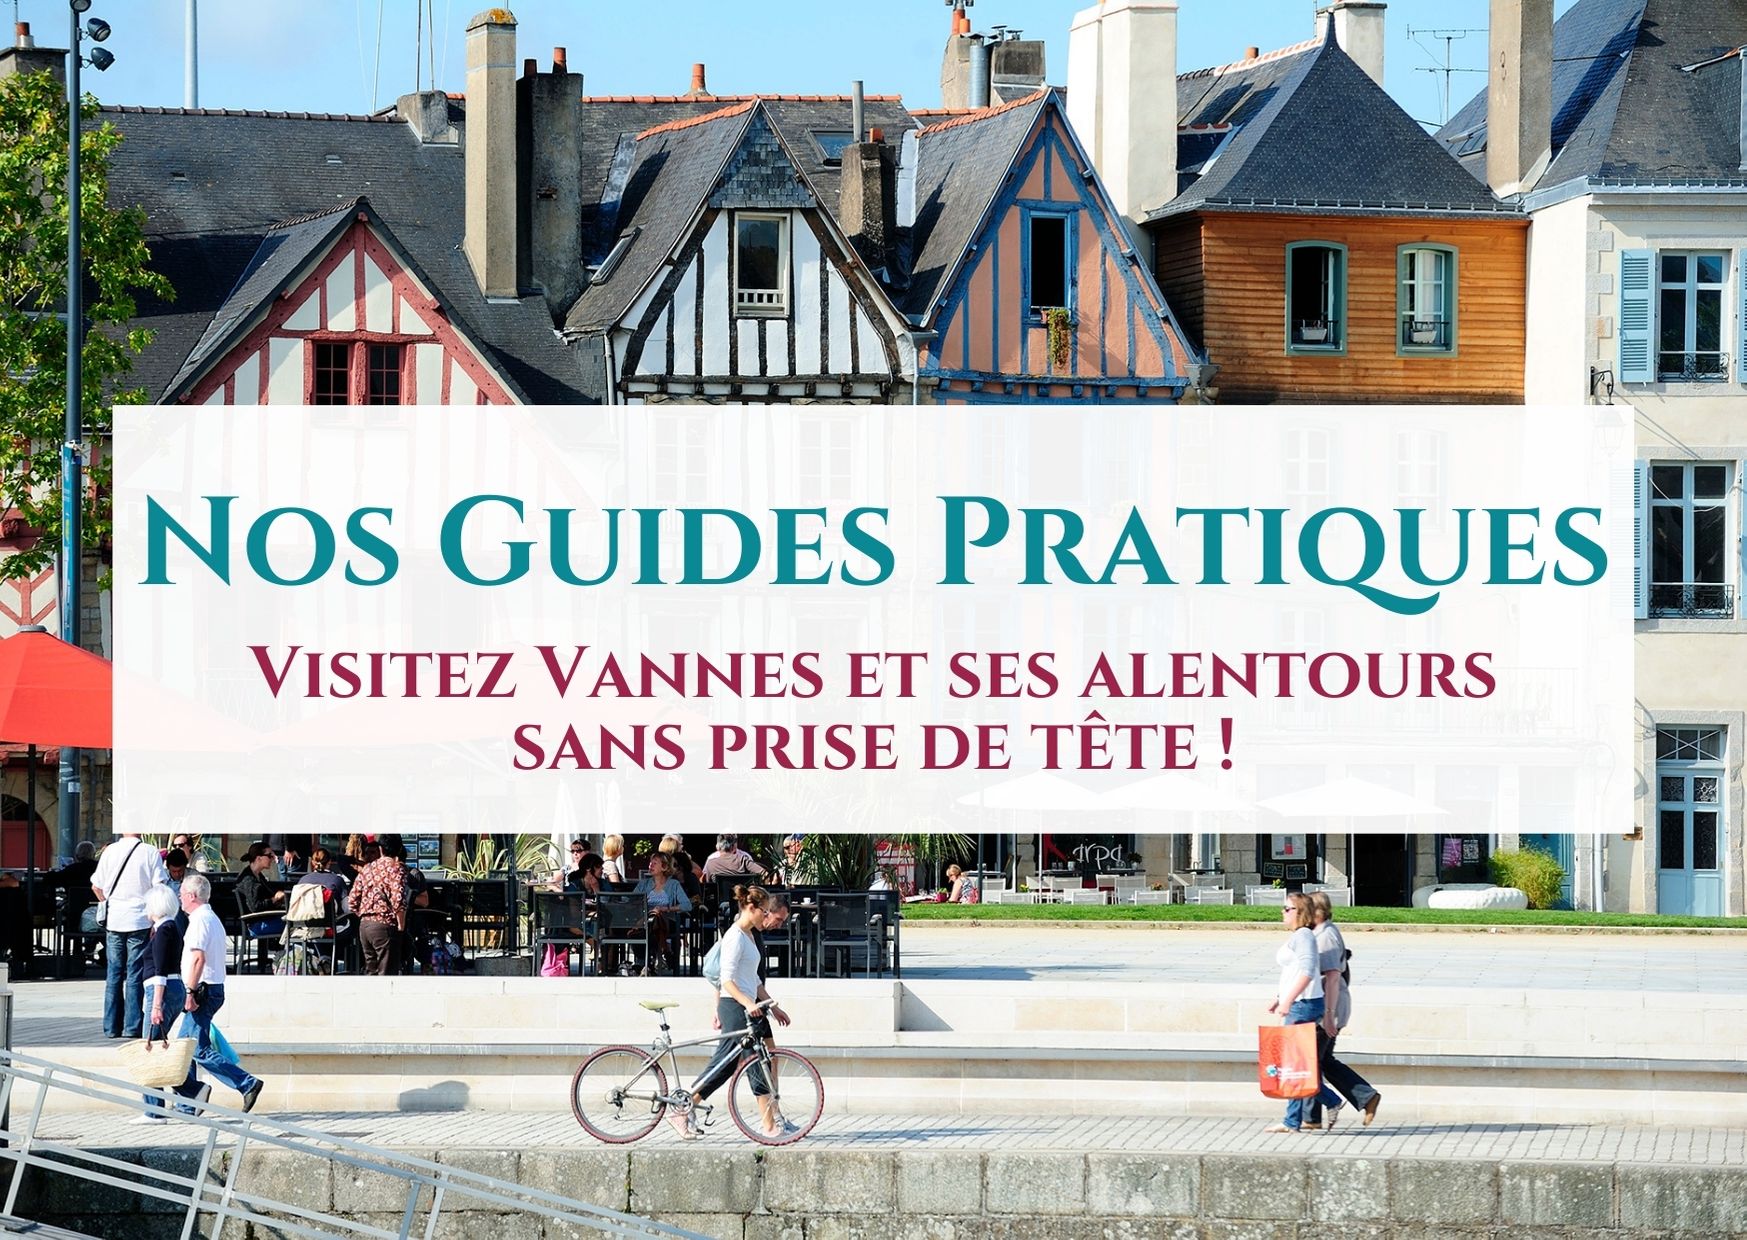 24 hours in Vannes: the practical guide to get away for a weekend 